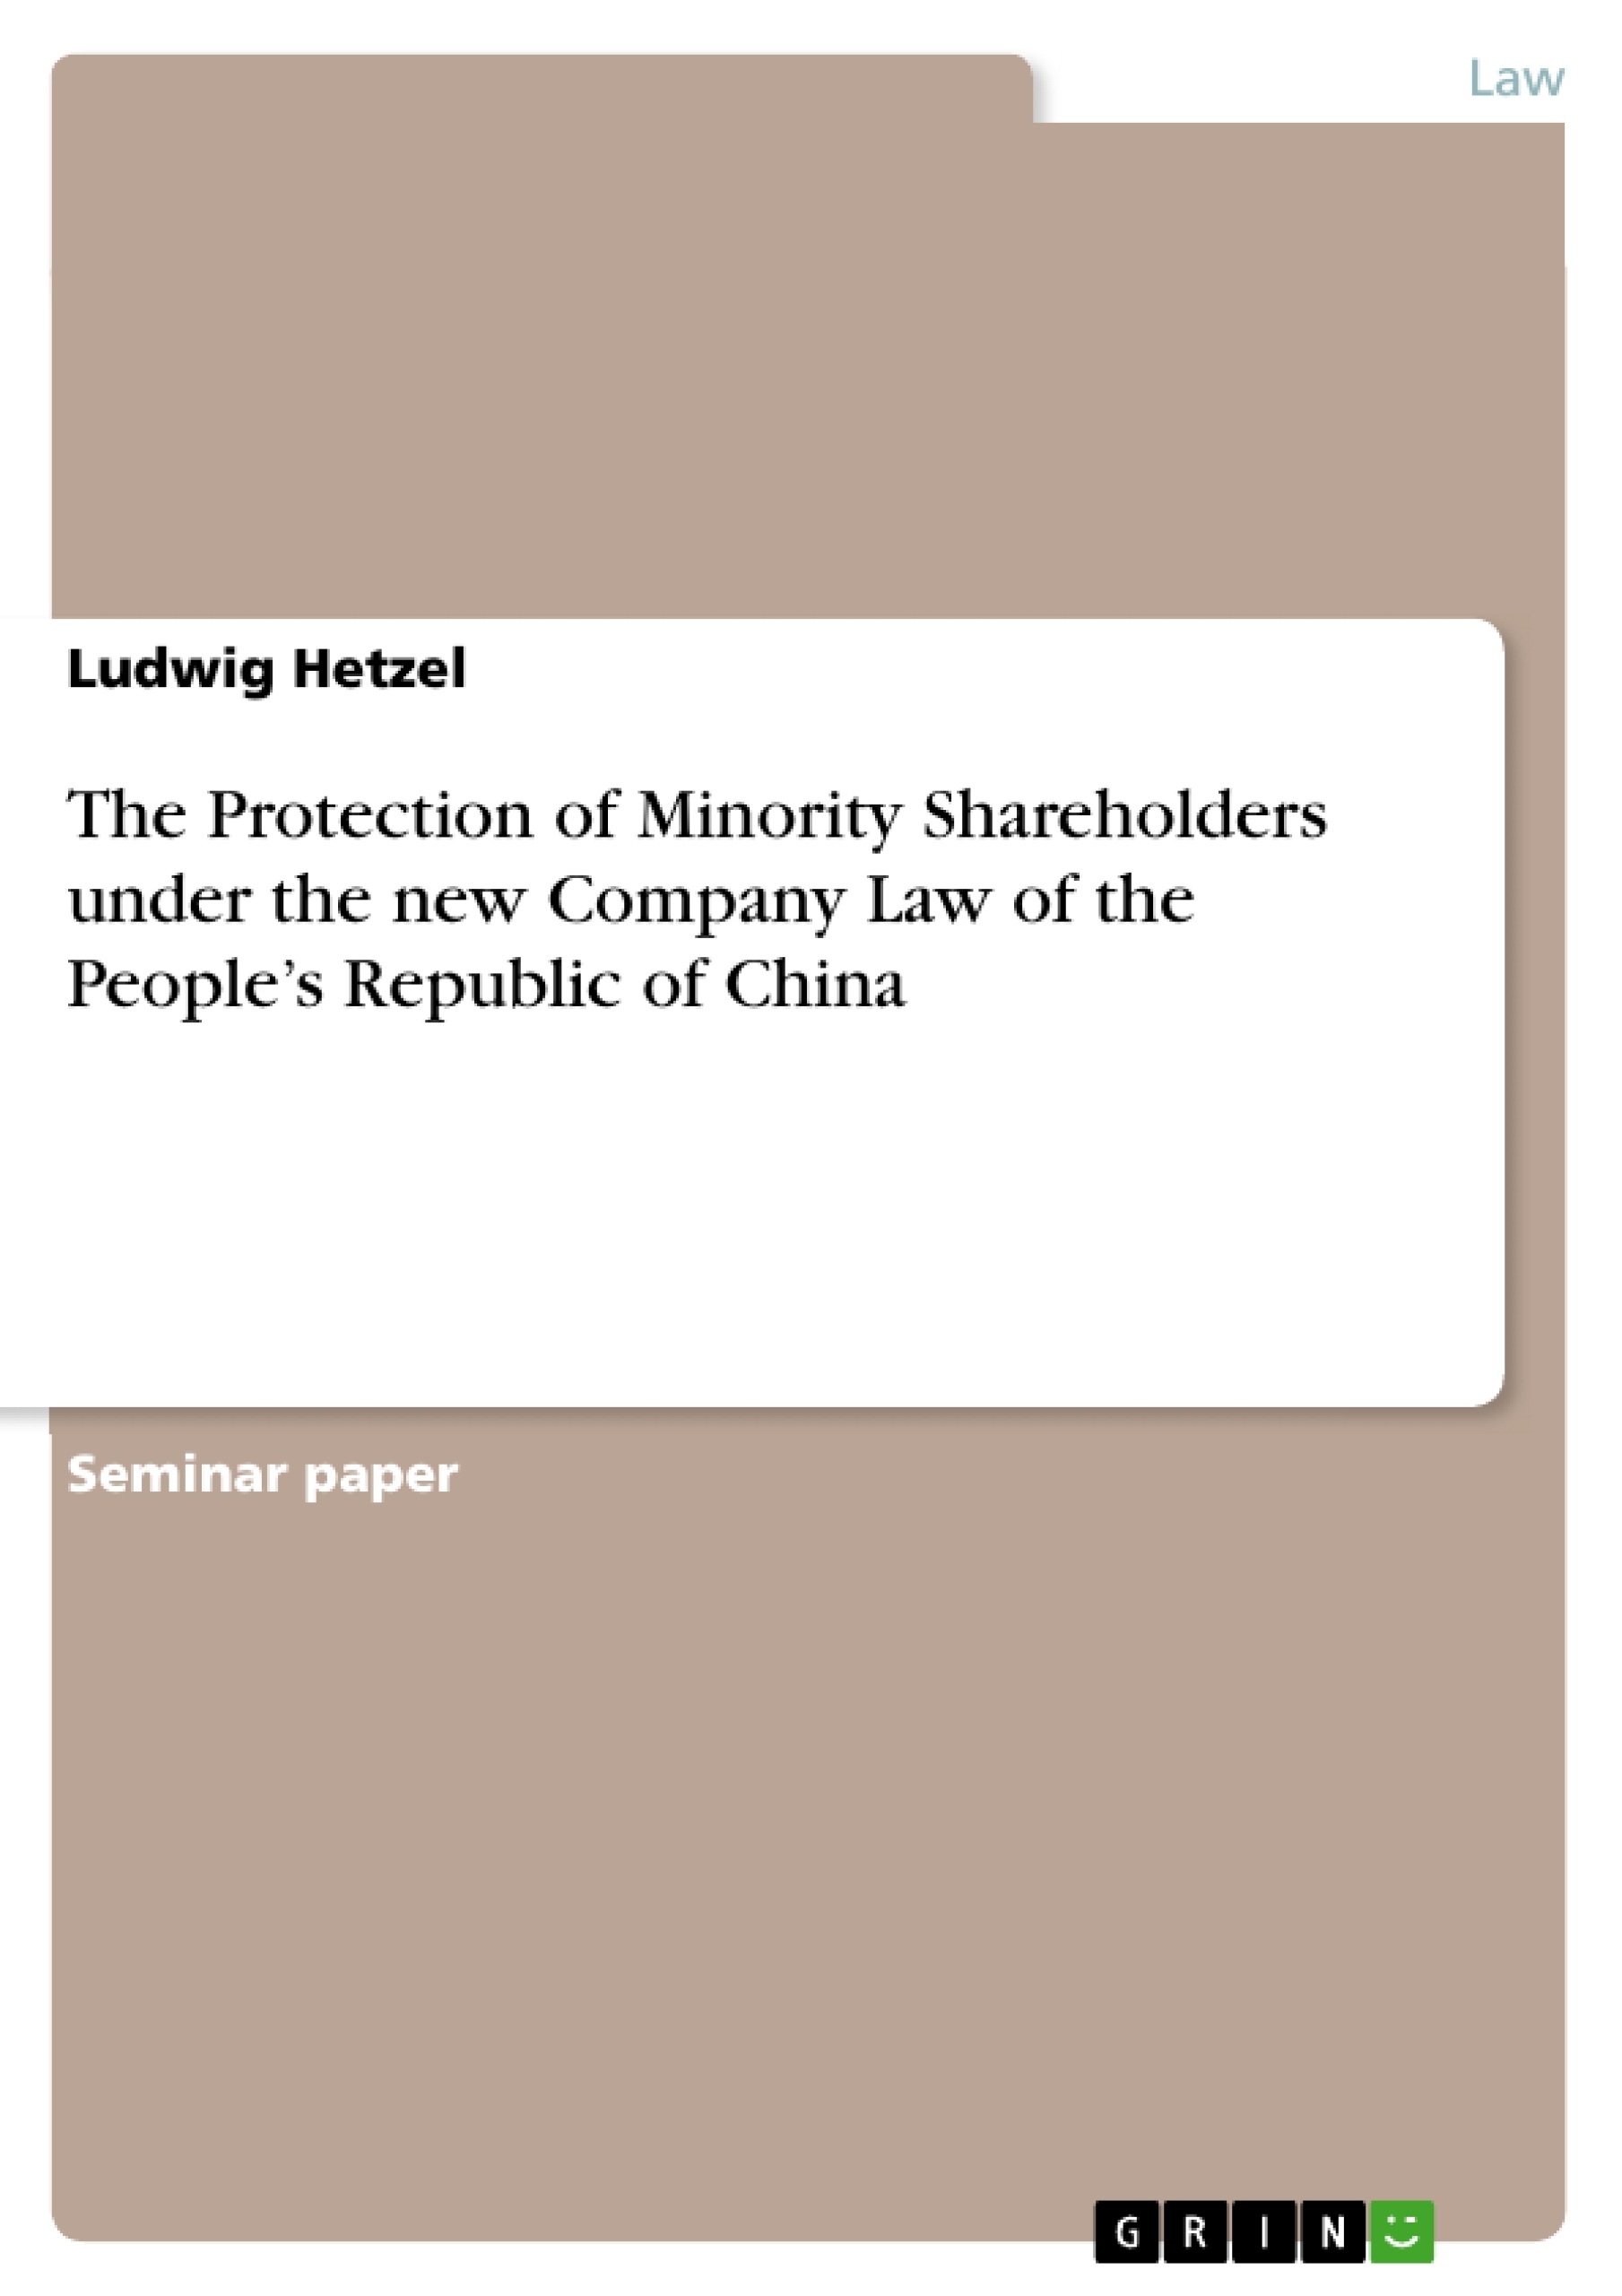 Titel: The Protection of Minority Shareholders under the new Company Law of the People’s Republic of China